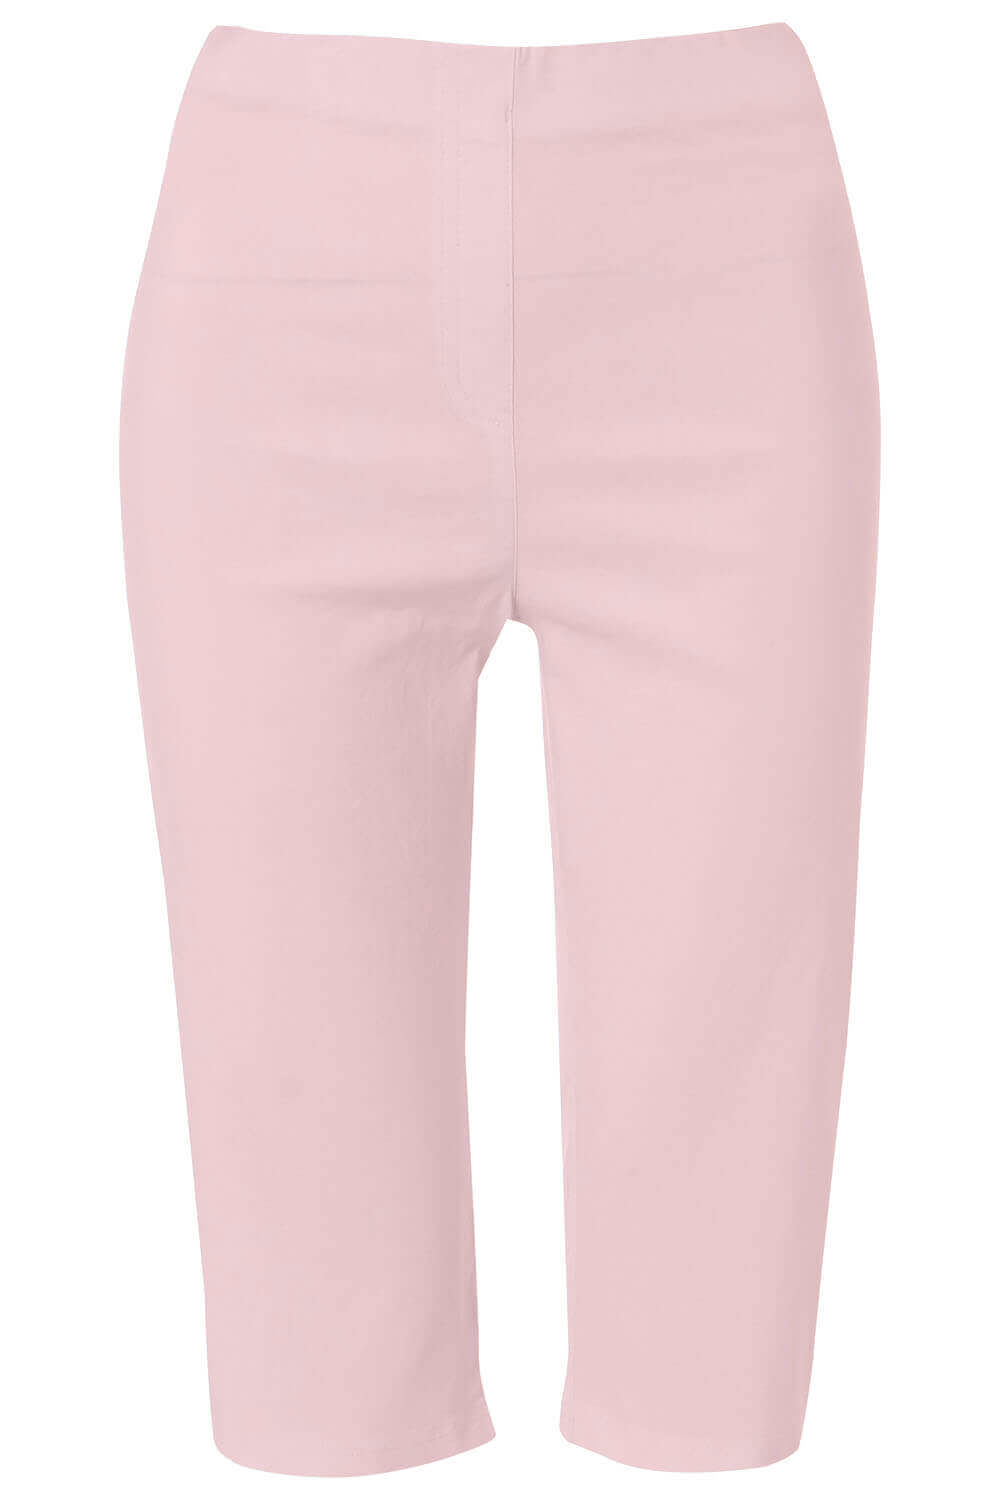 Light-Pink Stretch Knee Length Shorts, Image 3 of 3